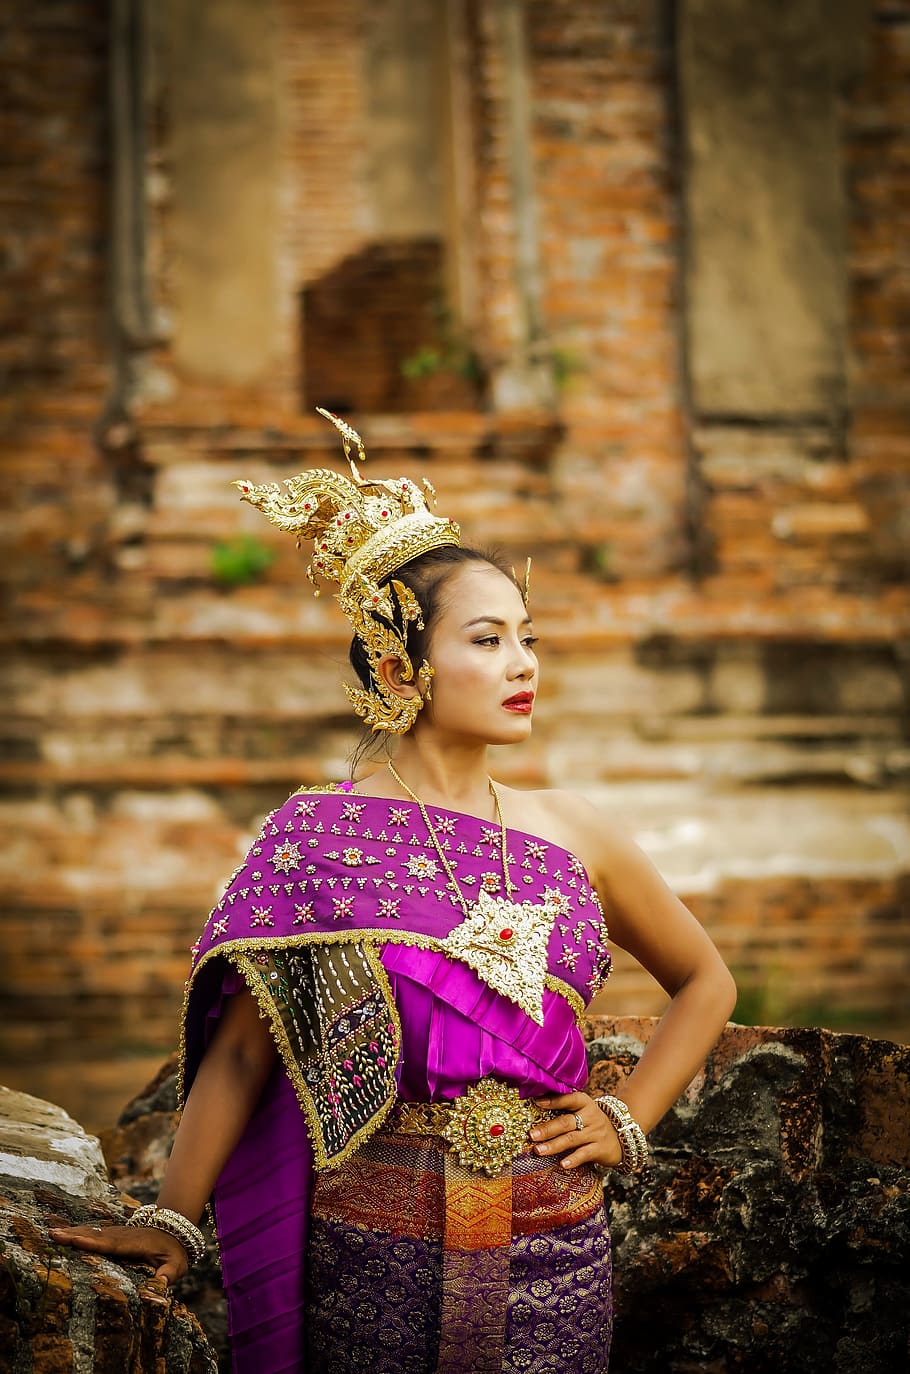 thailand, thailand sets, ancient, lady, purple, gold, beautiful, the concept, acting, one person